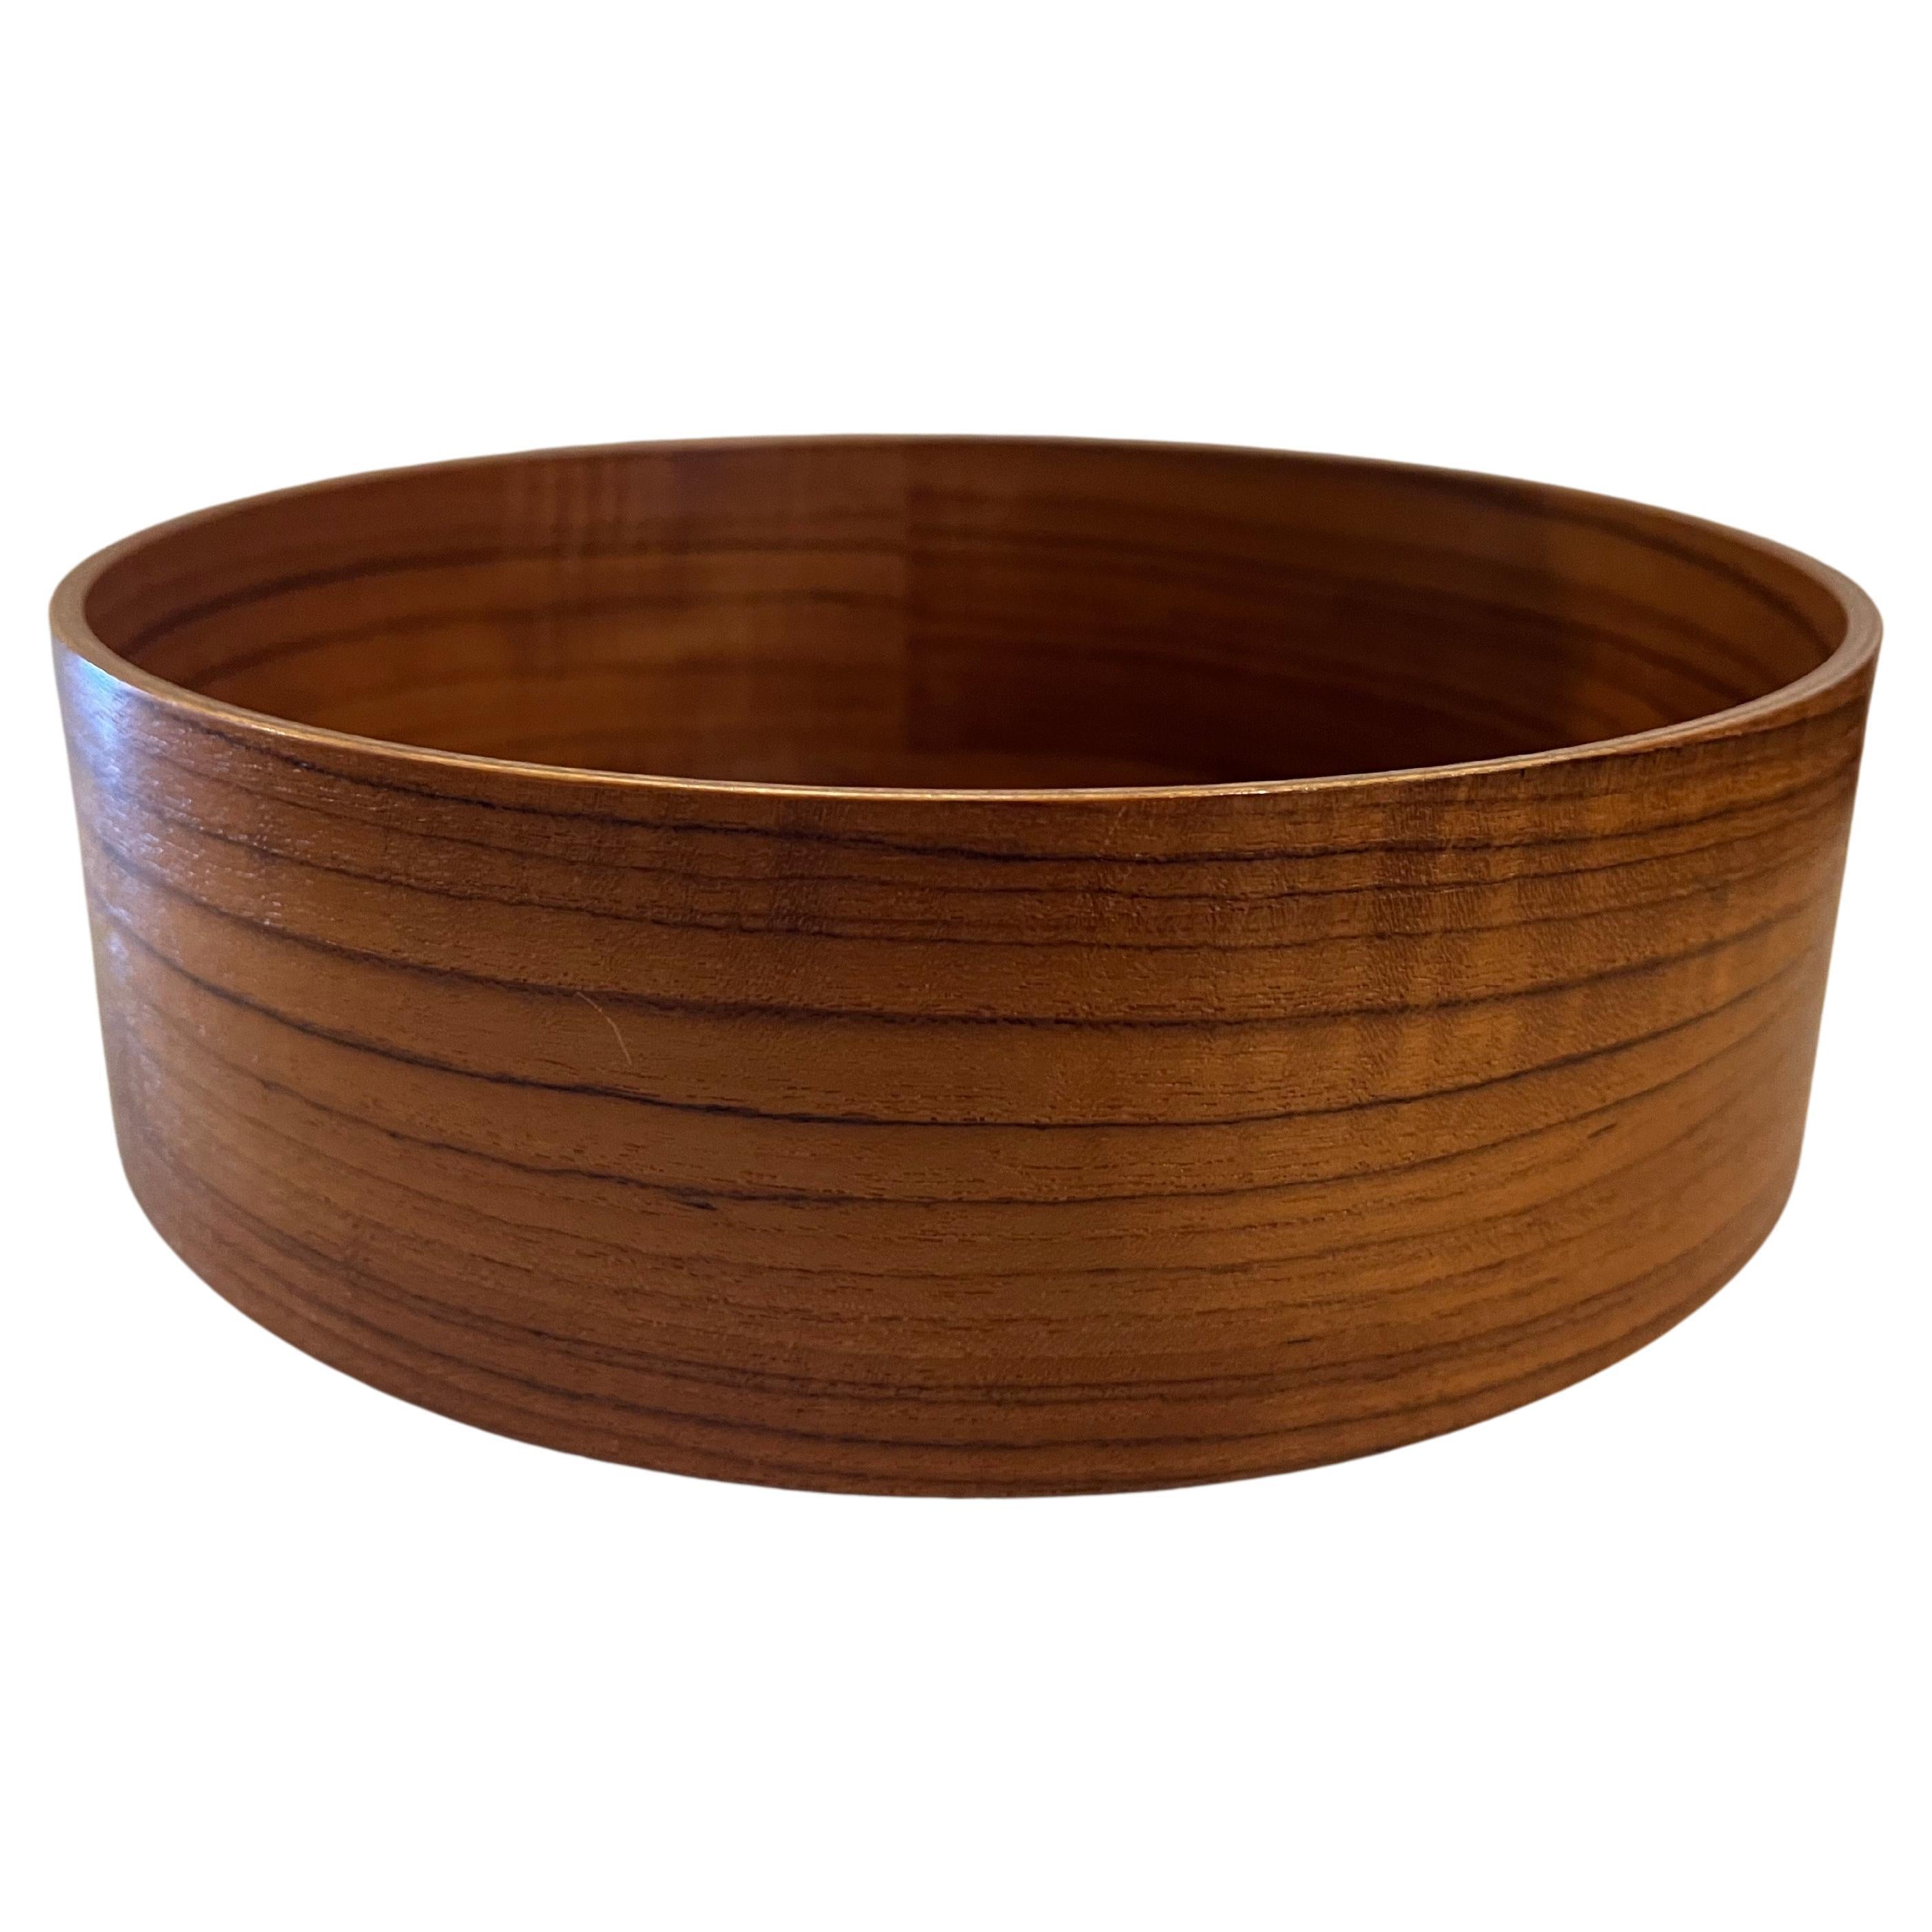 Danish Modern Rare Thin Wall Teak Straight Serving Bowl In Excellent Condition For Sale In San Diego, CA